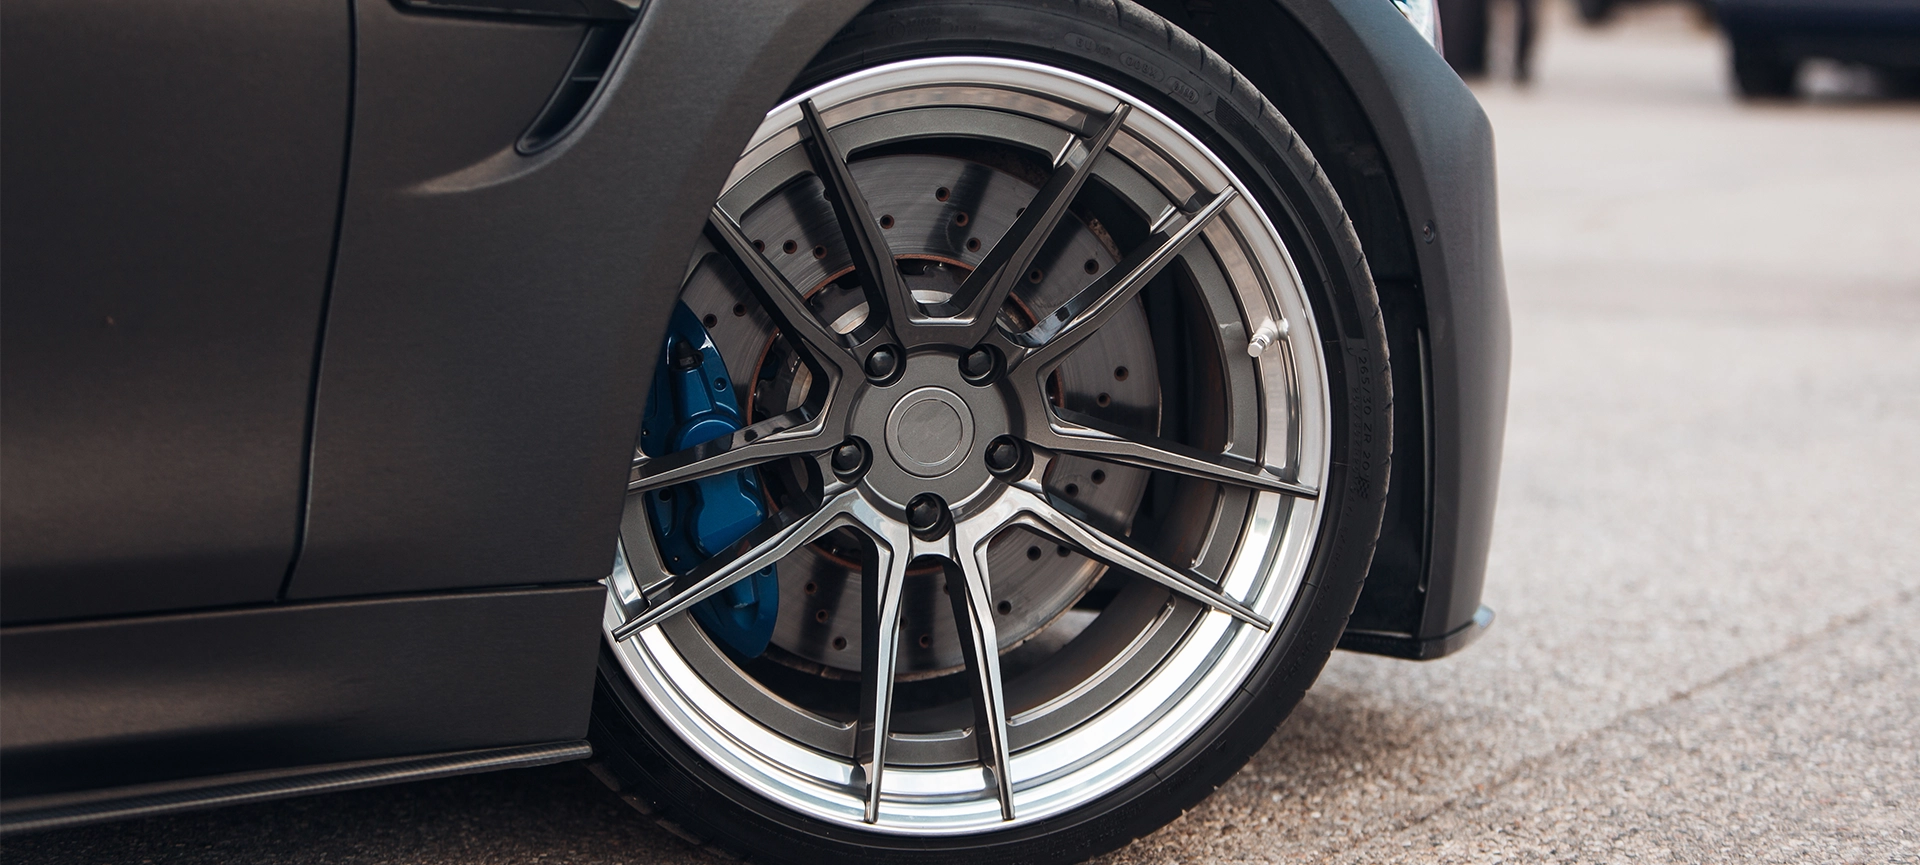 The Best Rims for Your Budget